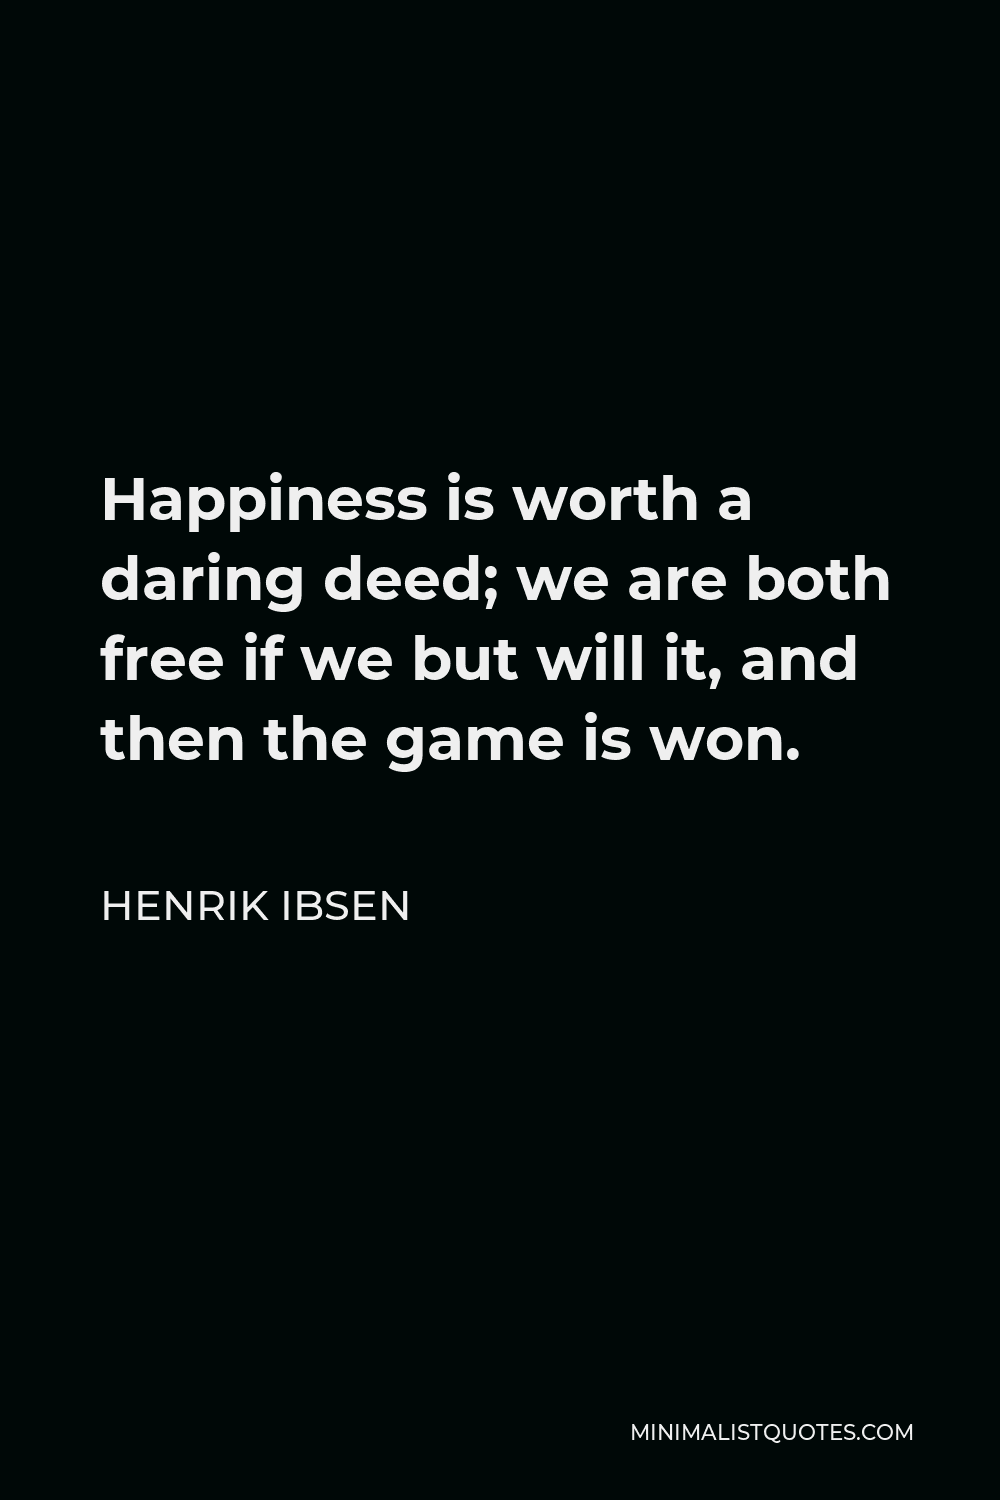 Henrik Ibsen Quote - Happiness is worth a daring deed; we are both free if we but will it, and then the game is won.